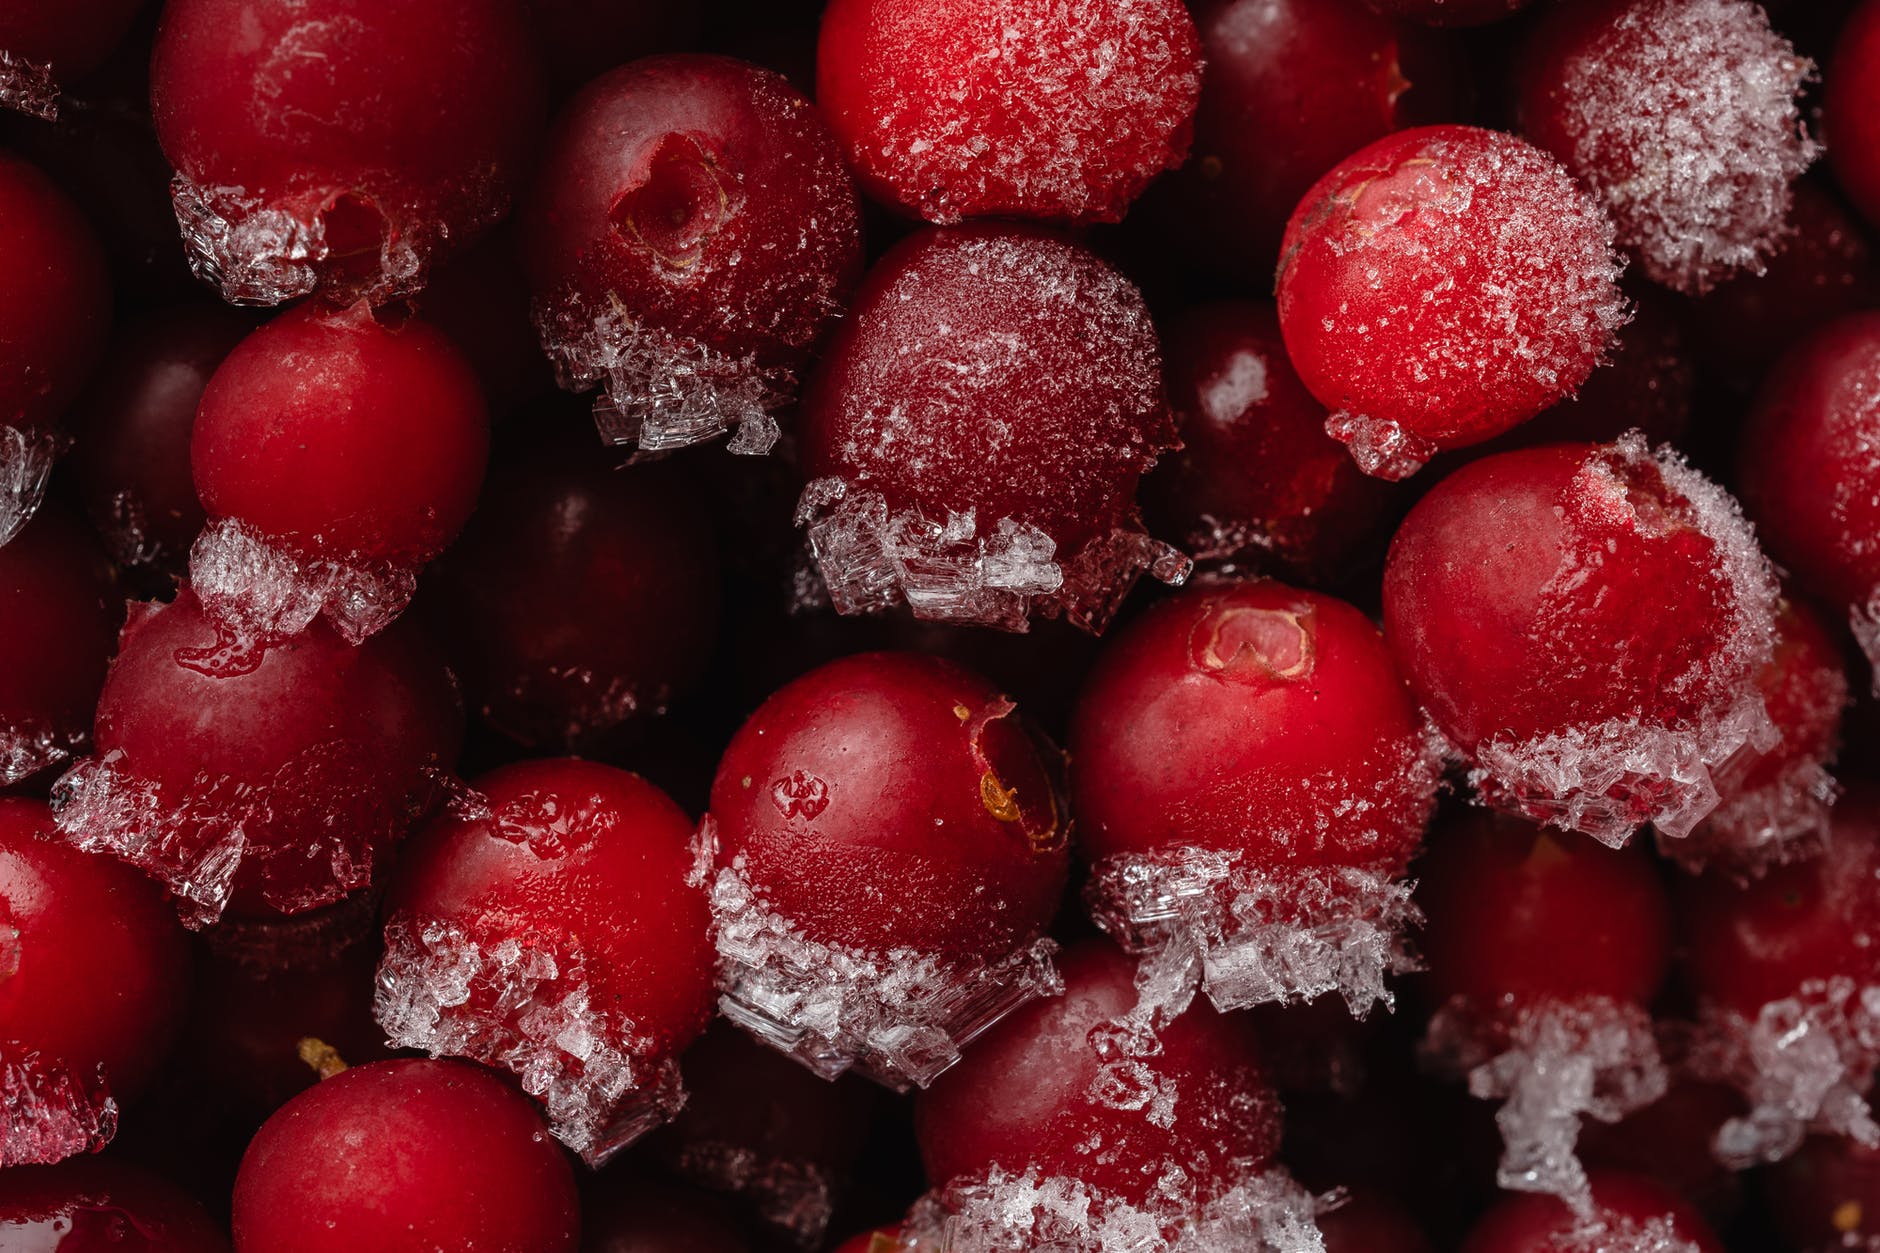 frozen red round fruits- possibly cranberries which as available in the frozen aisle of many supermarkets globally. Food date labels for frozen fruit relate to food quality rather than safety.